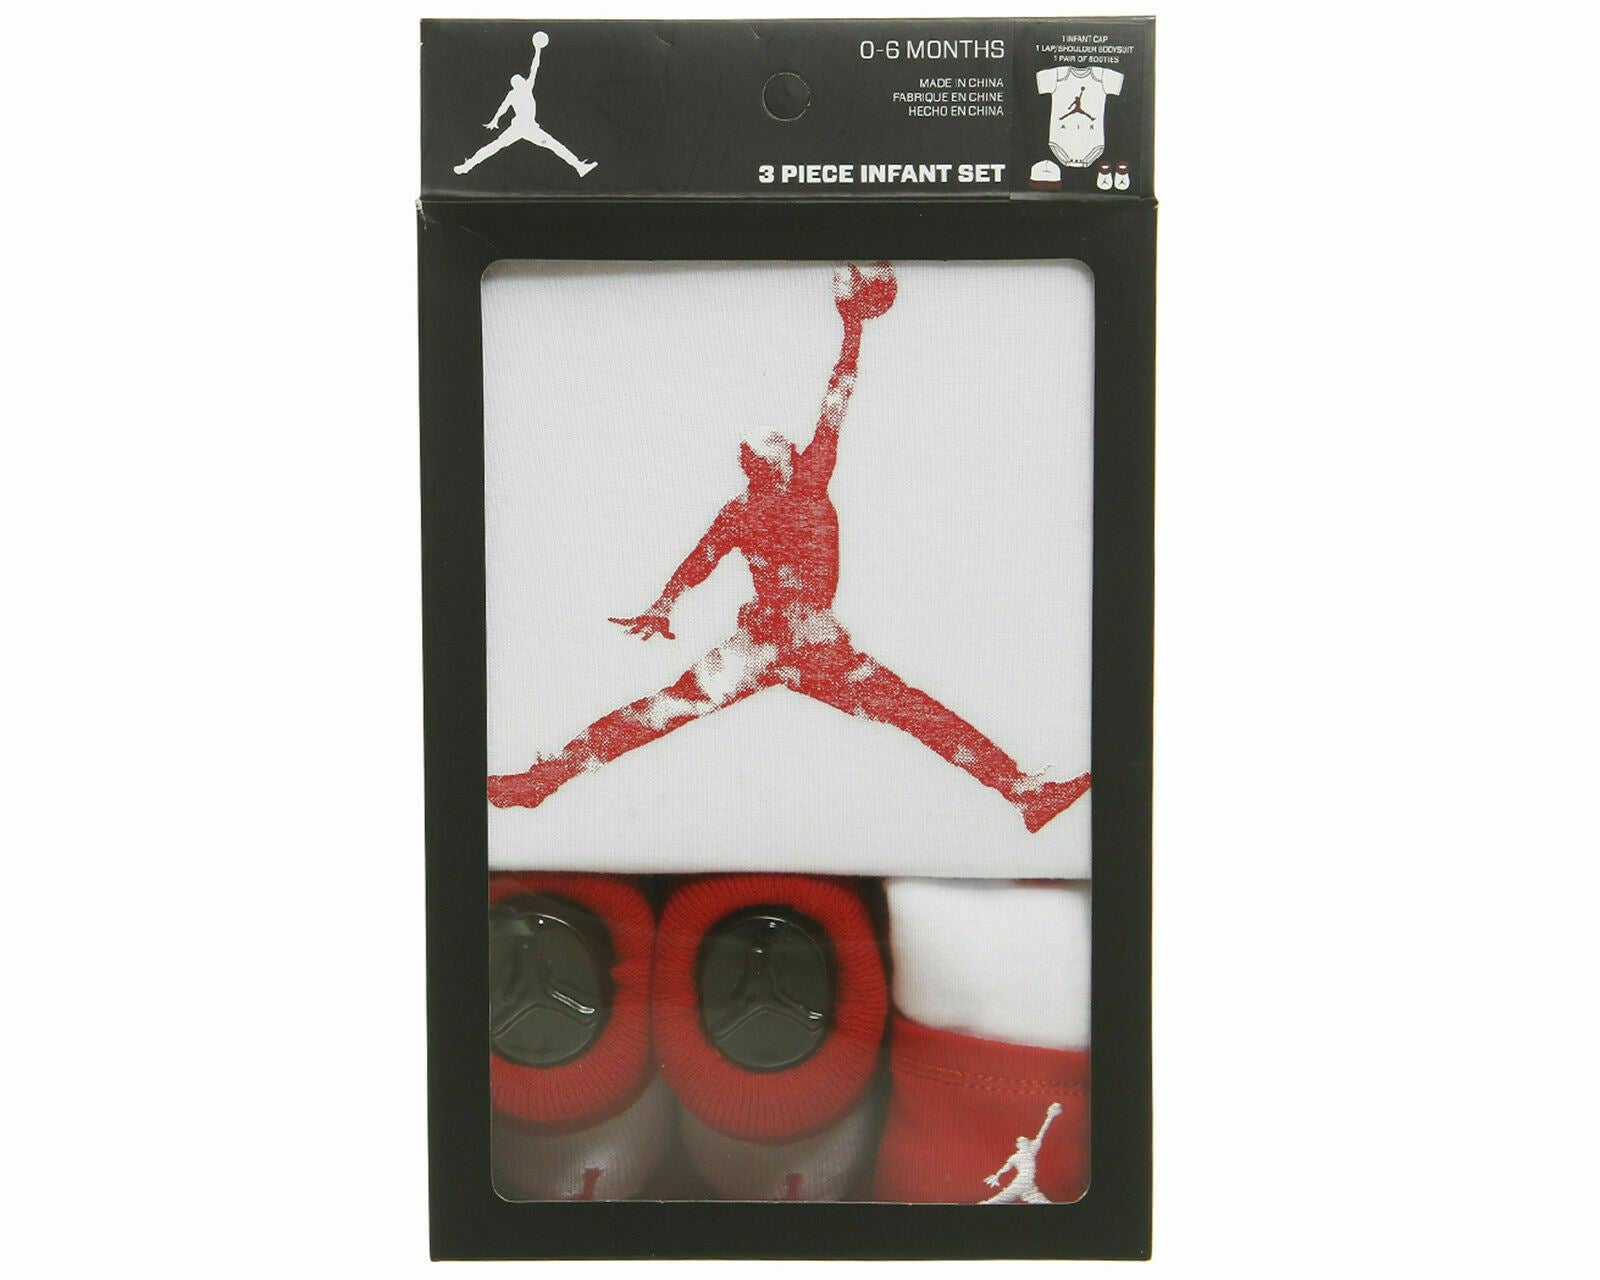 NIKE AIR JORDAN Baby 3-piece Outfit Gift Set, White/Red, size 0-6 months